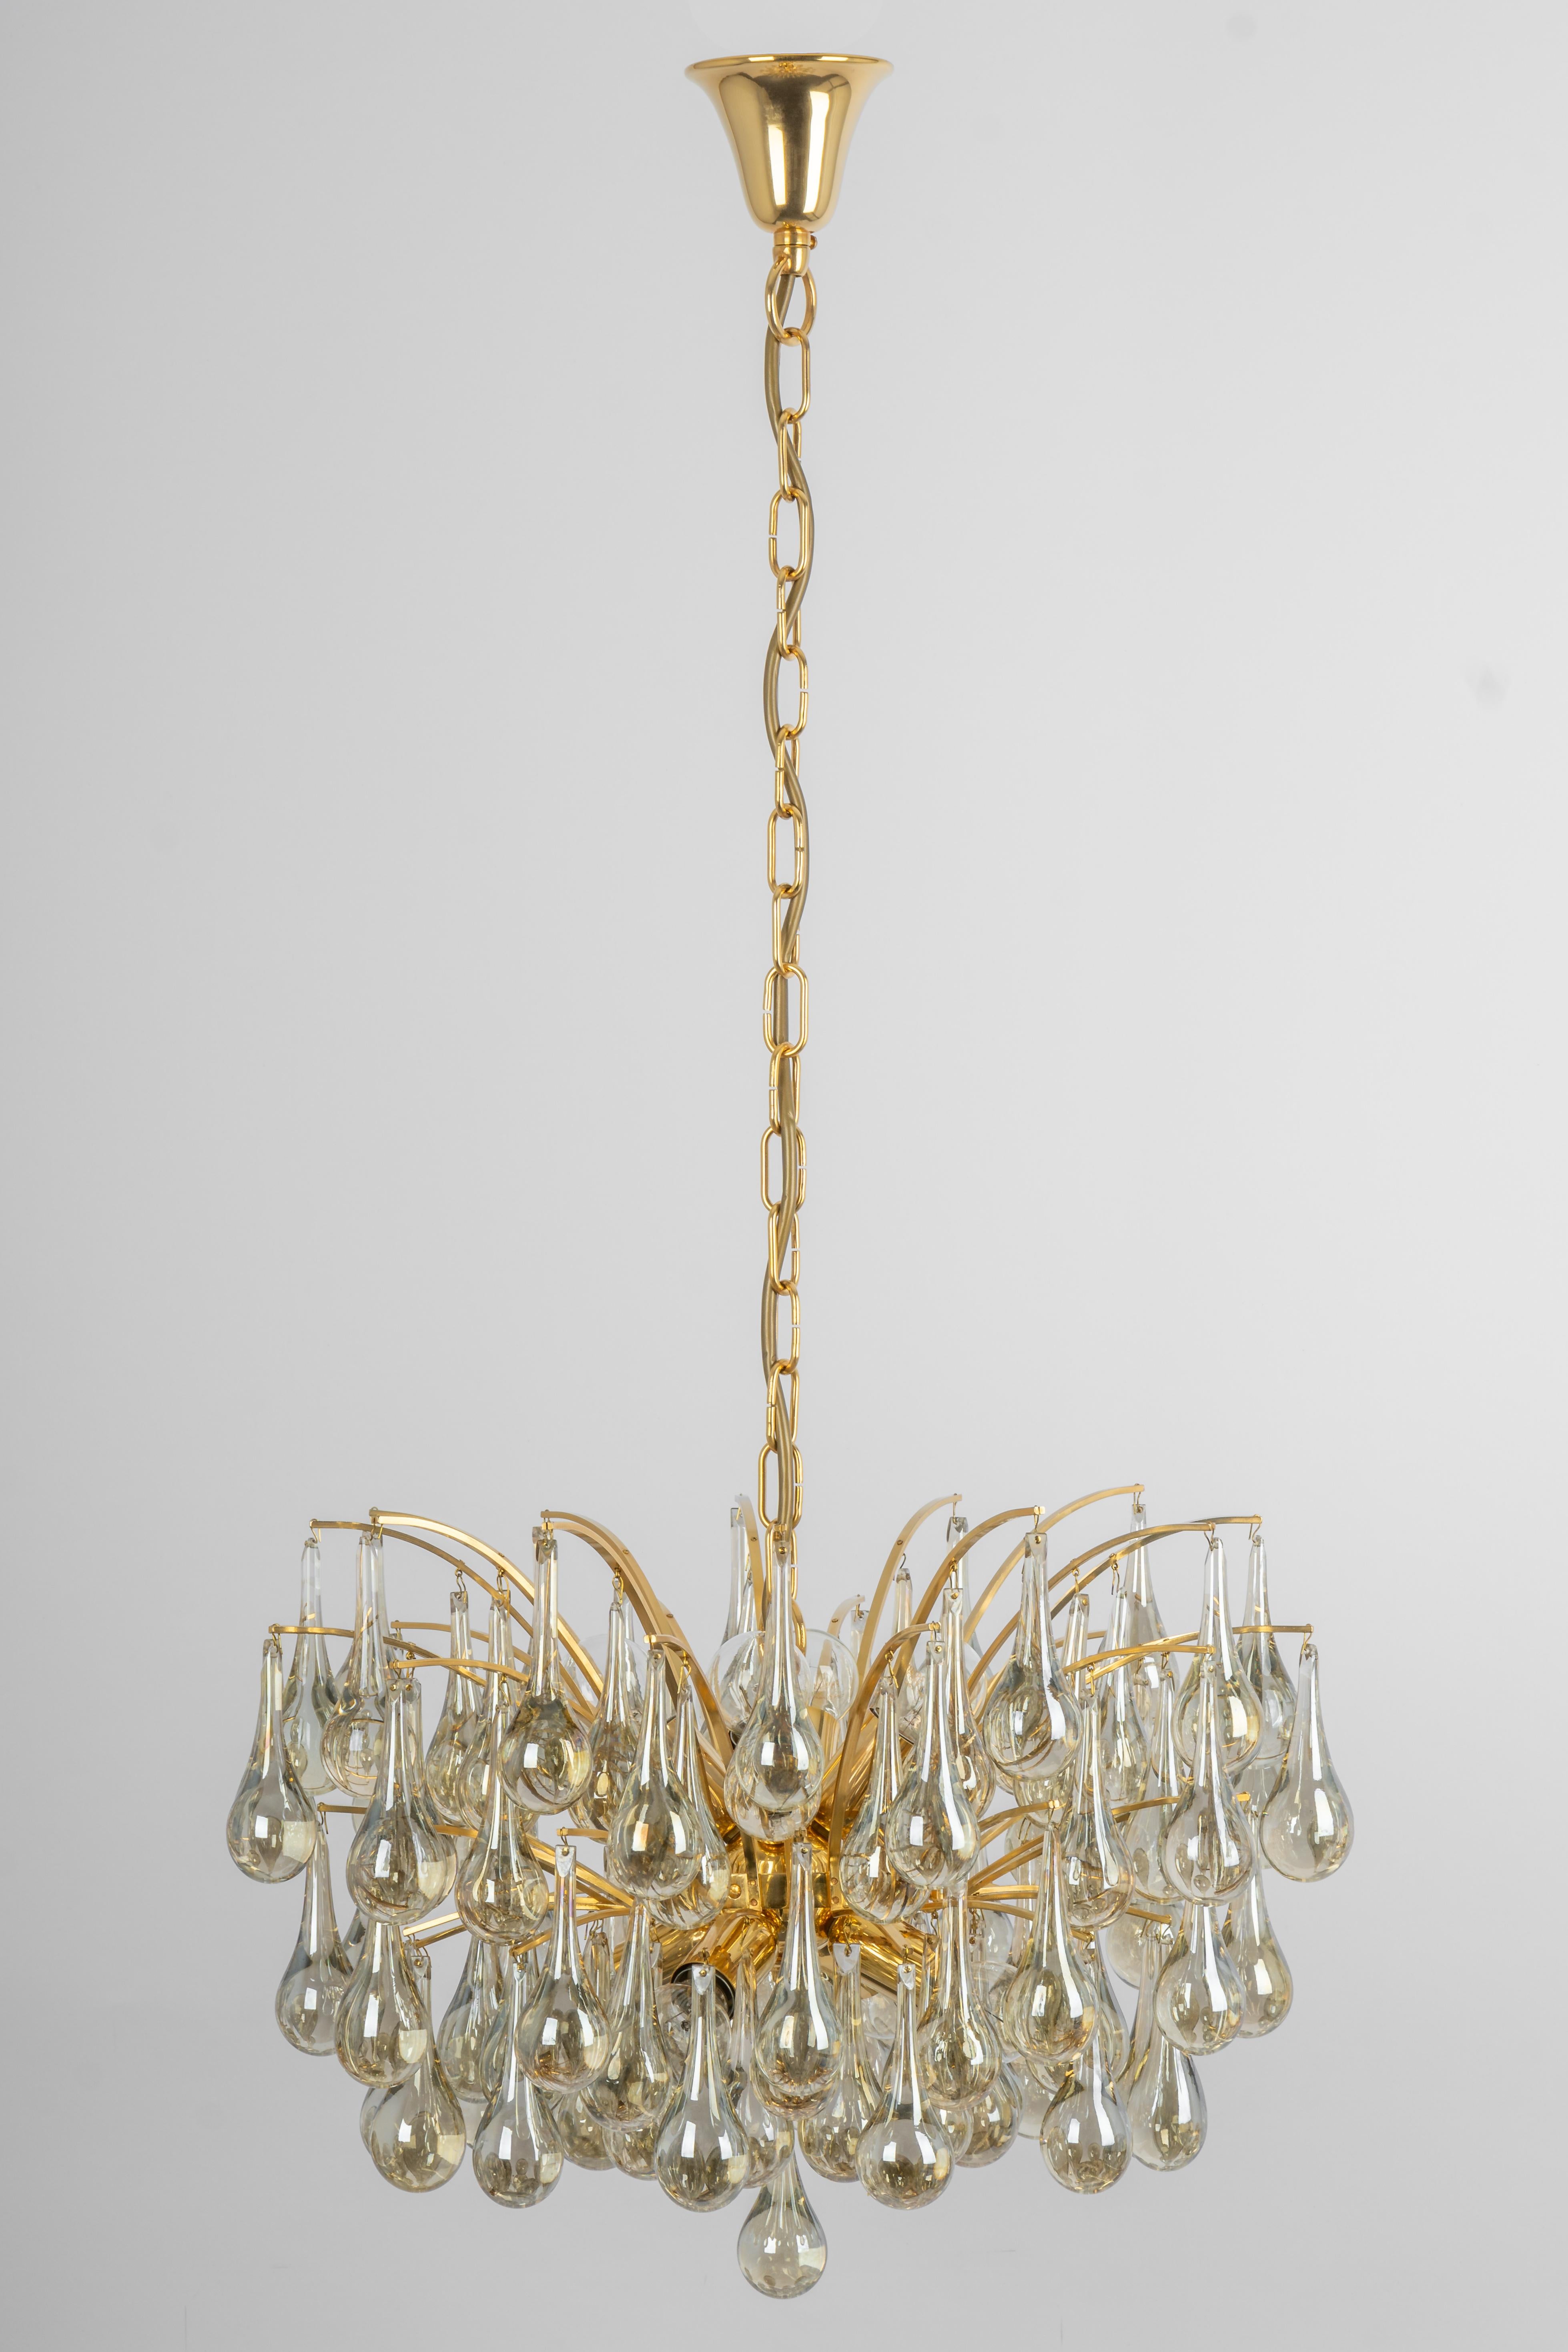 Stunning chandelier by Christoph Palme, Germany, manufactured in the 1970s. It’s composed of Murano teardrop glass pieces on a gilded brass frame.

High quality and in very good condition. Cleaned, well-wired, and ready to use. 

The fixture